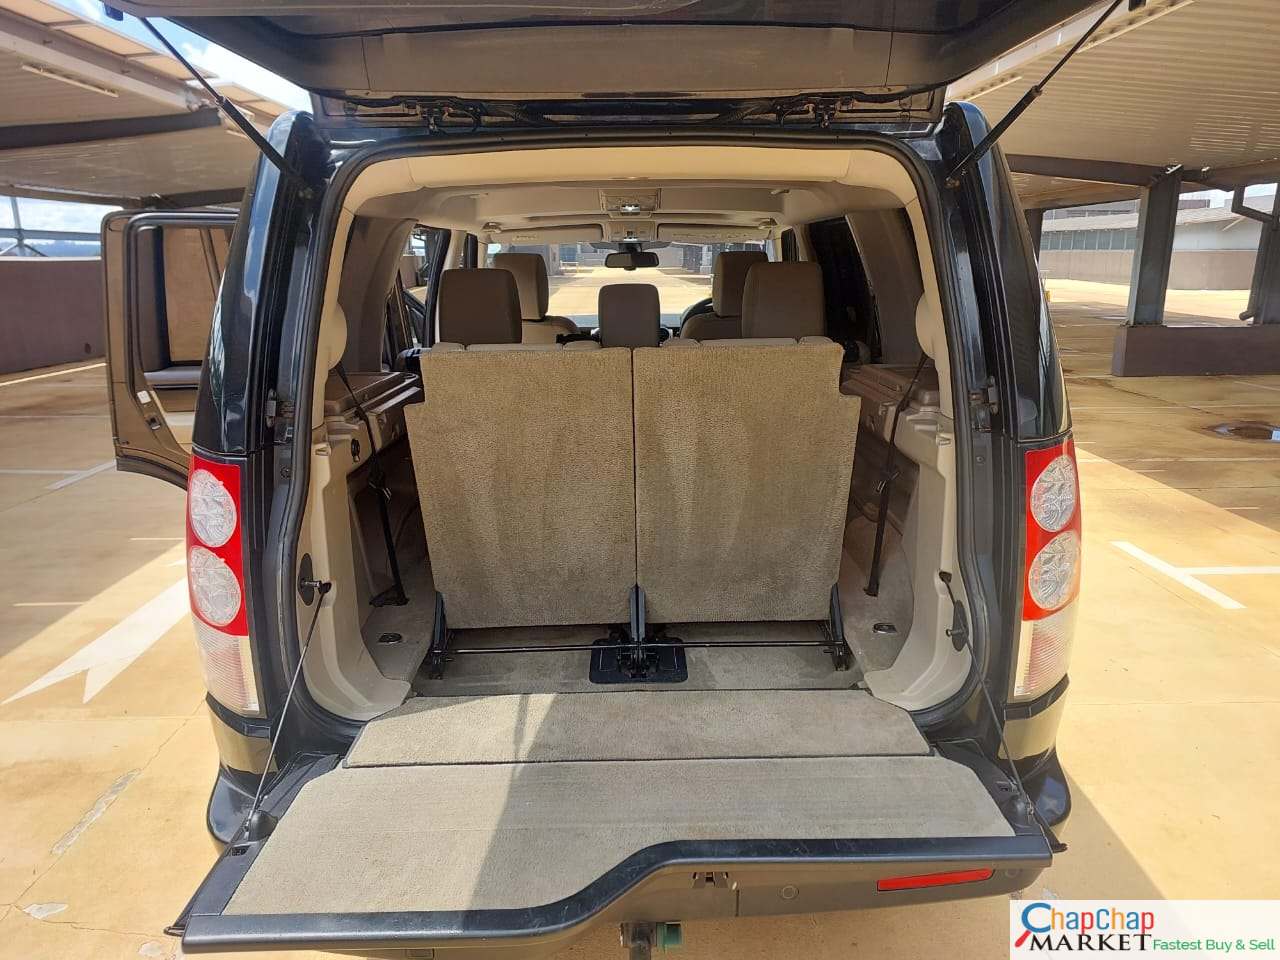 Land Rover Discovery 4 triple sunroof QUICK SALE You Pay 30% Deposit Trade in Ok For sale in kenya